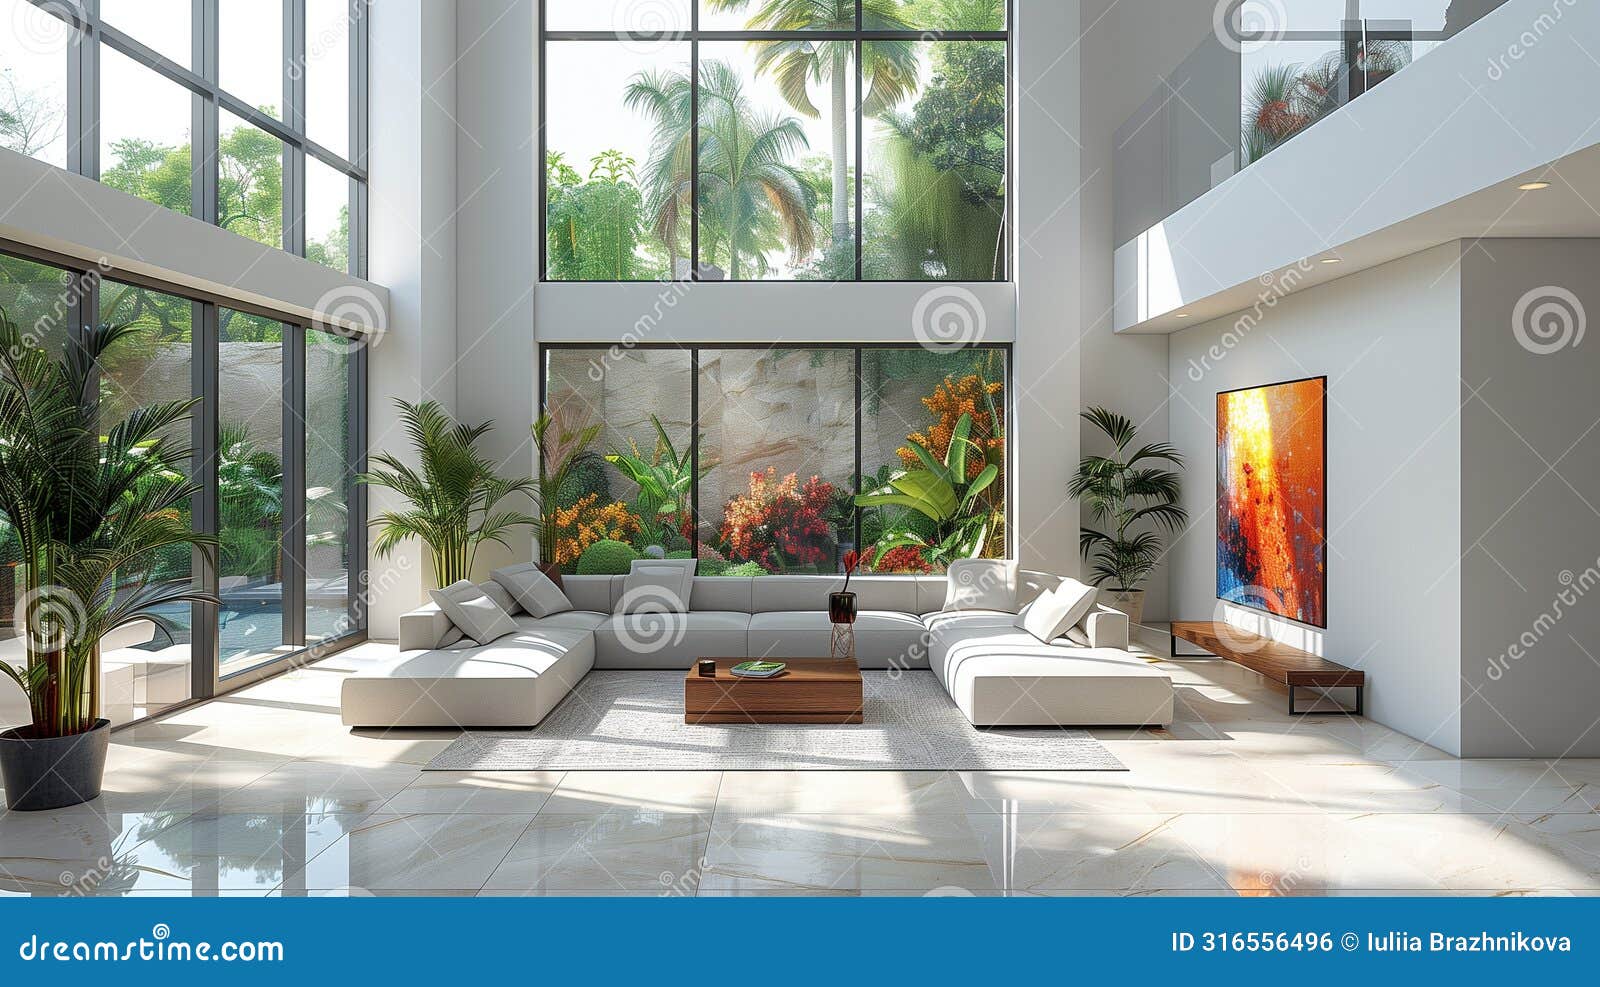 modern living room with large windows, tropical garden outside, high ceilings and marble flooring